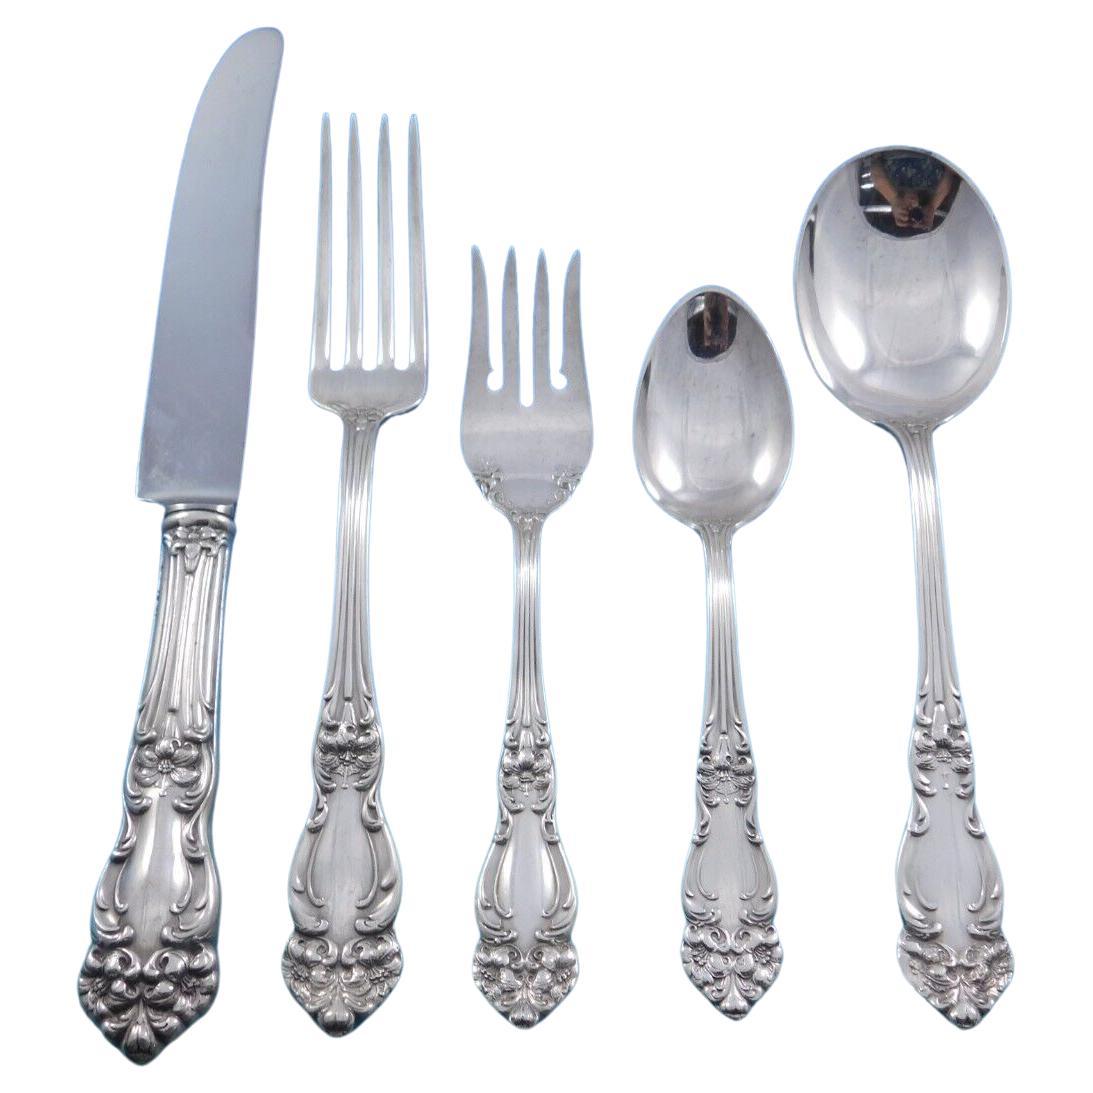 Amaryllis by Reed & Barton Sterling Silver Flatware Set 8 Service 43 pcs Dinner For Sale